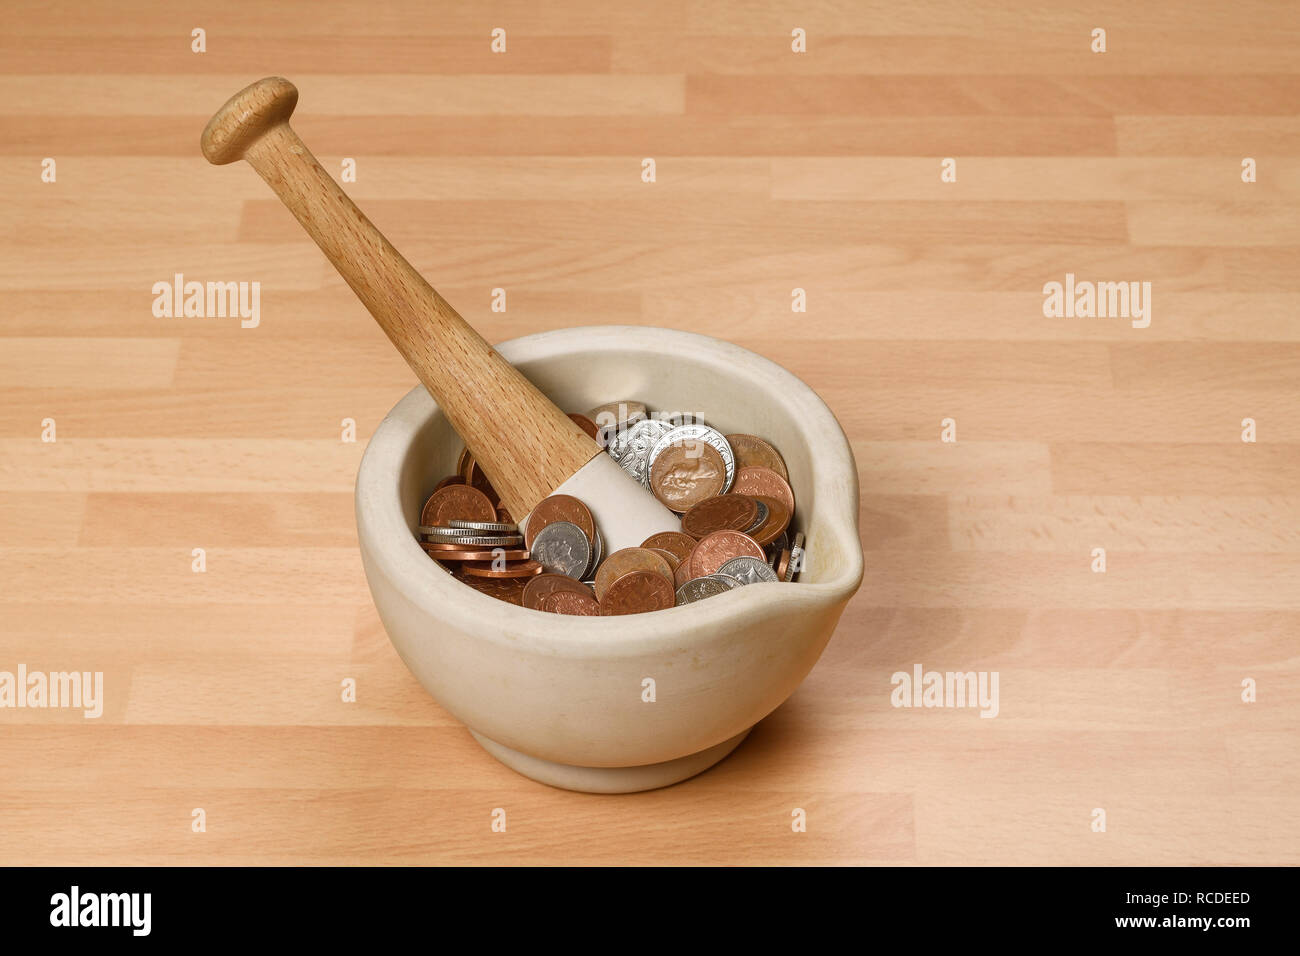 A pestle and mortar filled with UK pound sterling coins Stock Photo